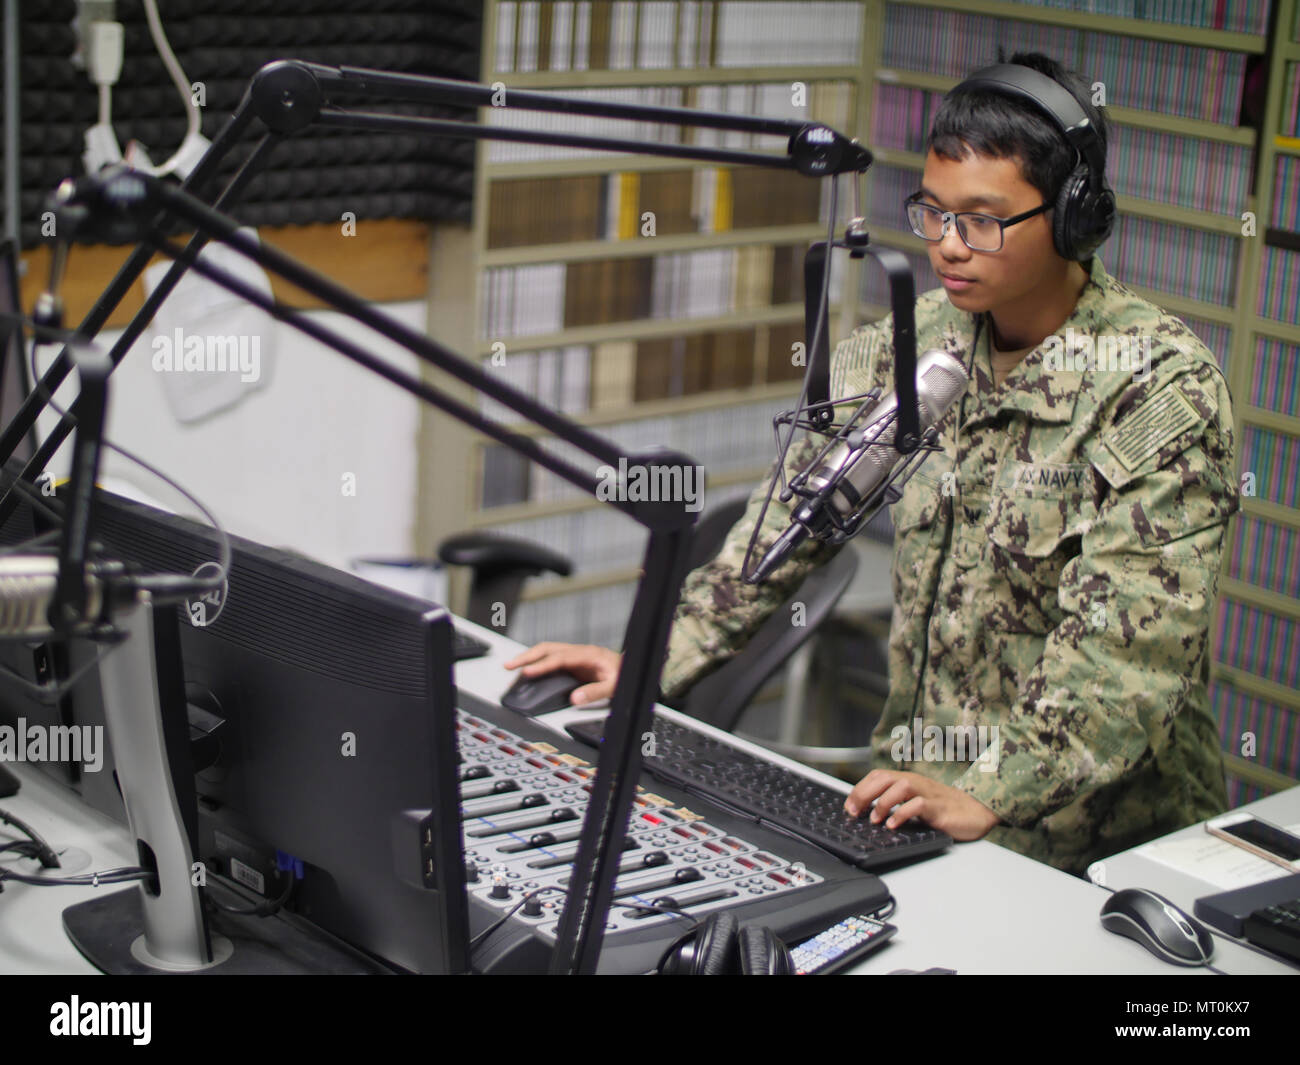 170717-N-DJ347-006 - DIEGO GARCIA, British Indian Ocean Territory (July 17,  2017) Mass Communication Specialist 3rd Class Jimmy Ong prepares for the  afternoon radio show on FM 99.1 The Eagle at American Forces